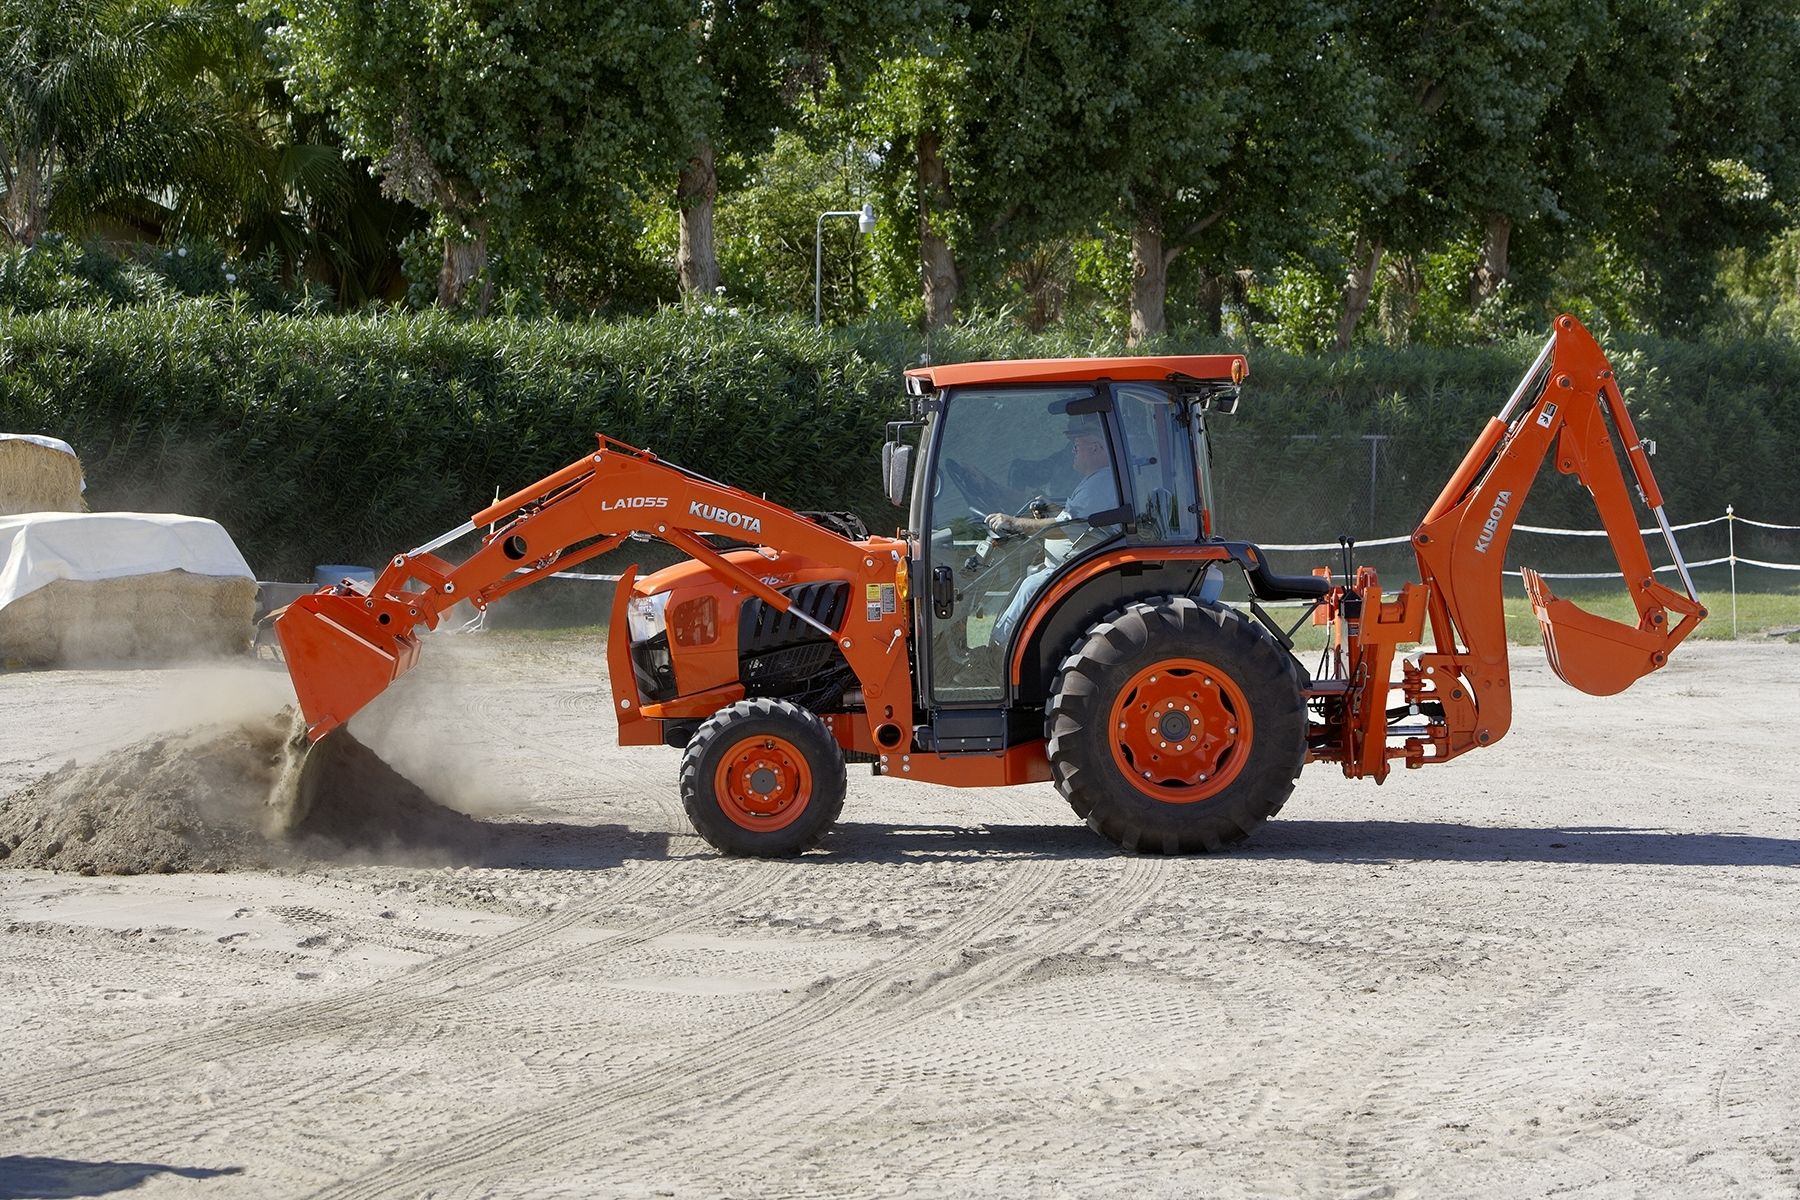 New Kubota Grand L60 Series Features All New Styling And A Level